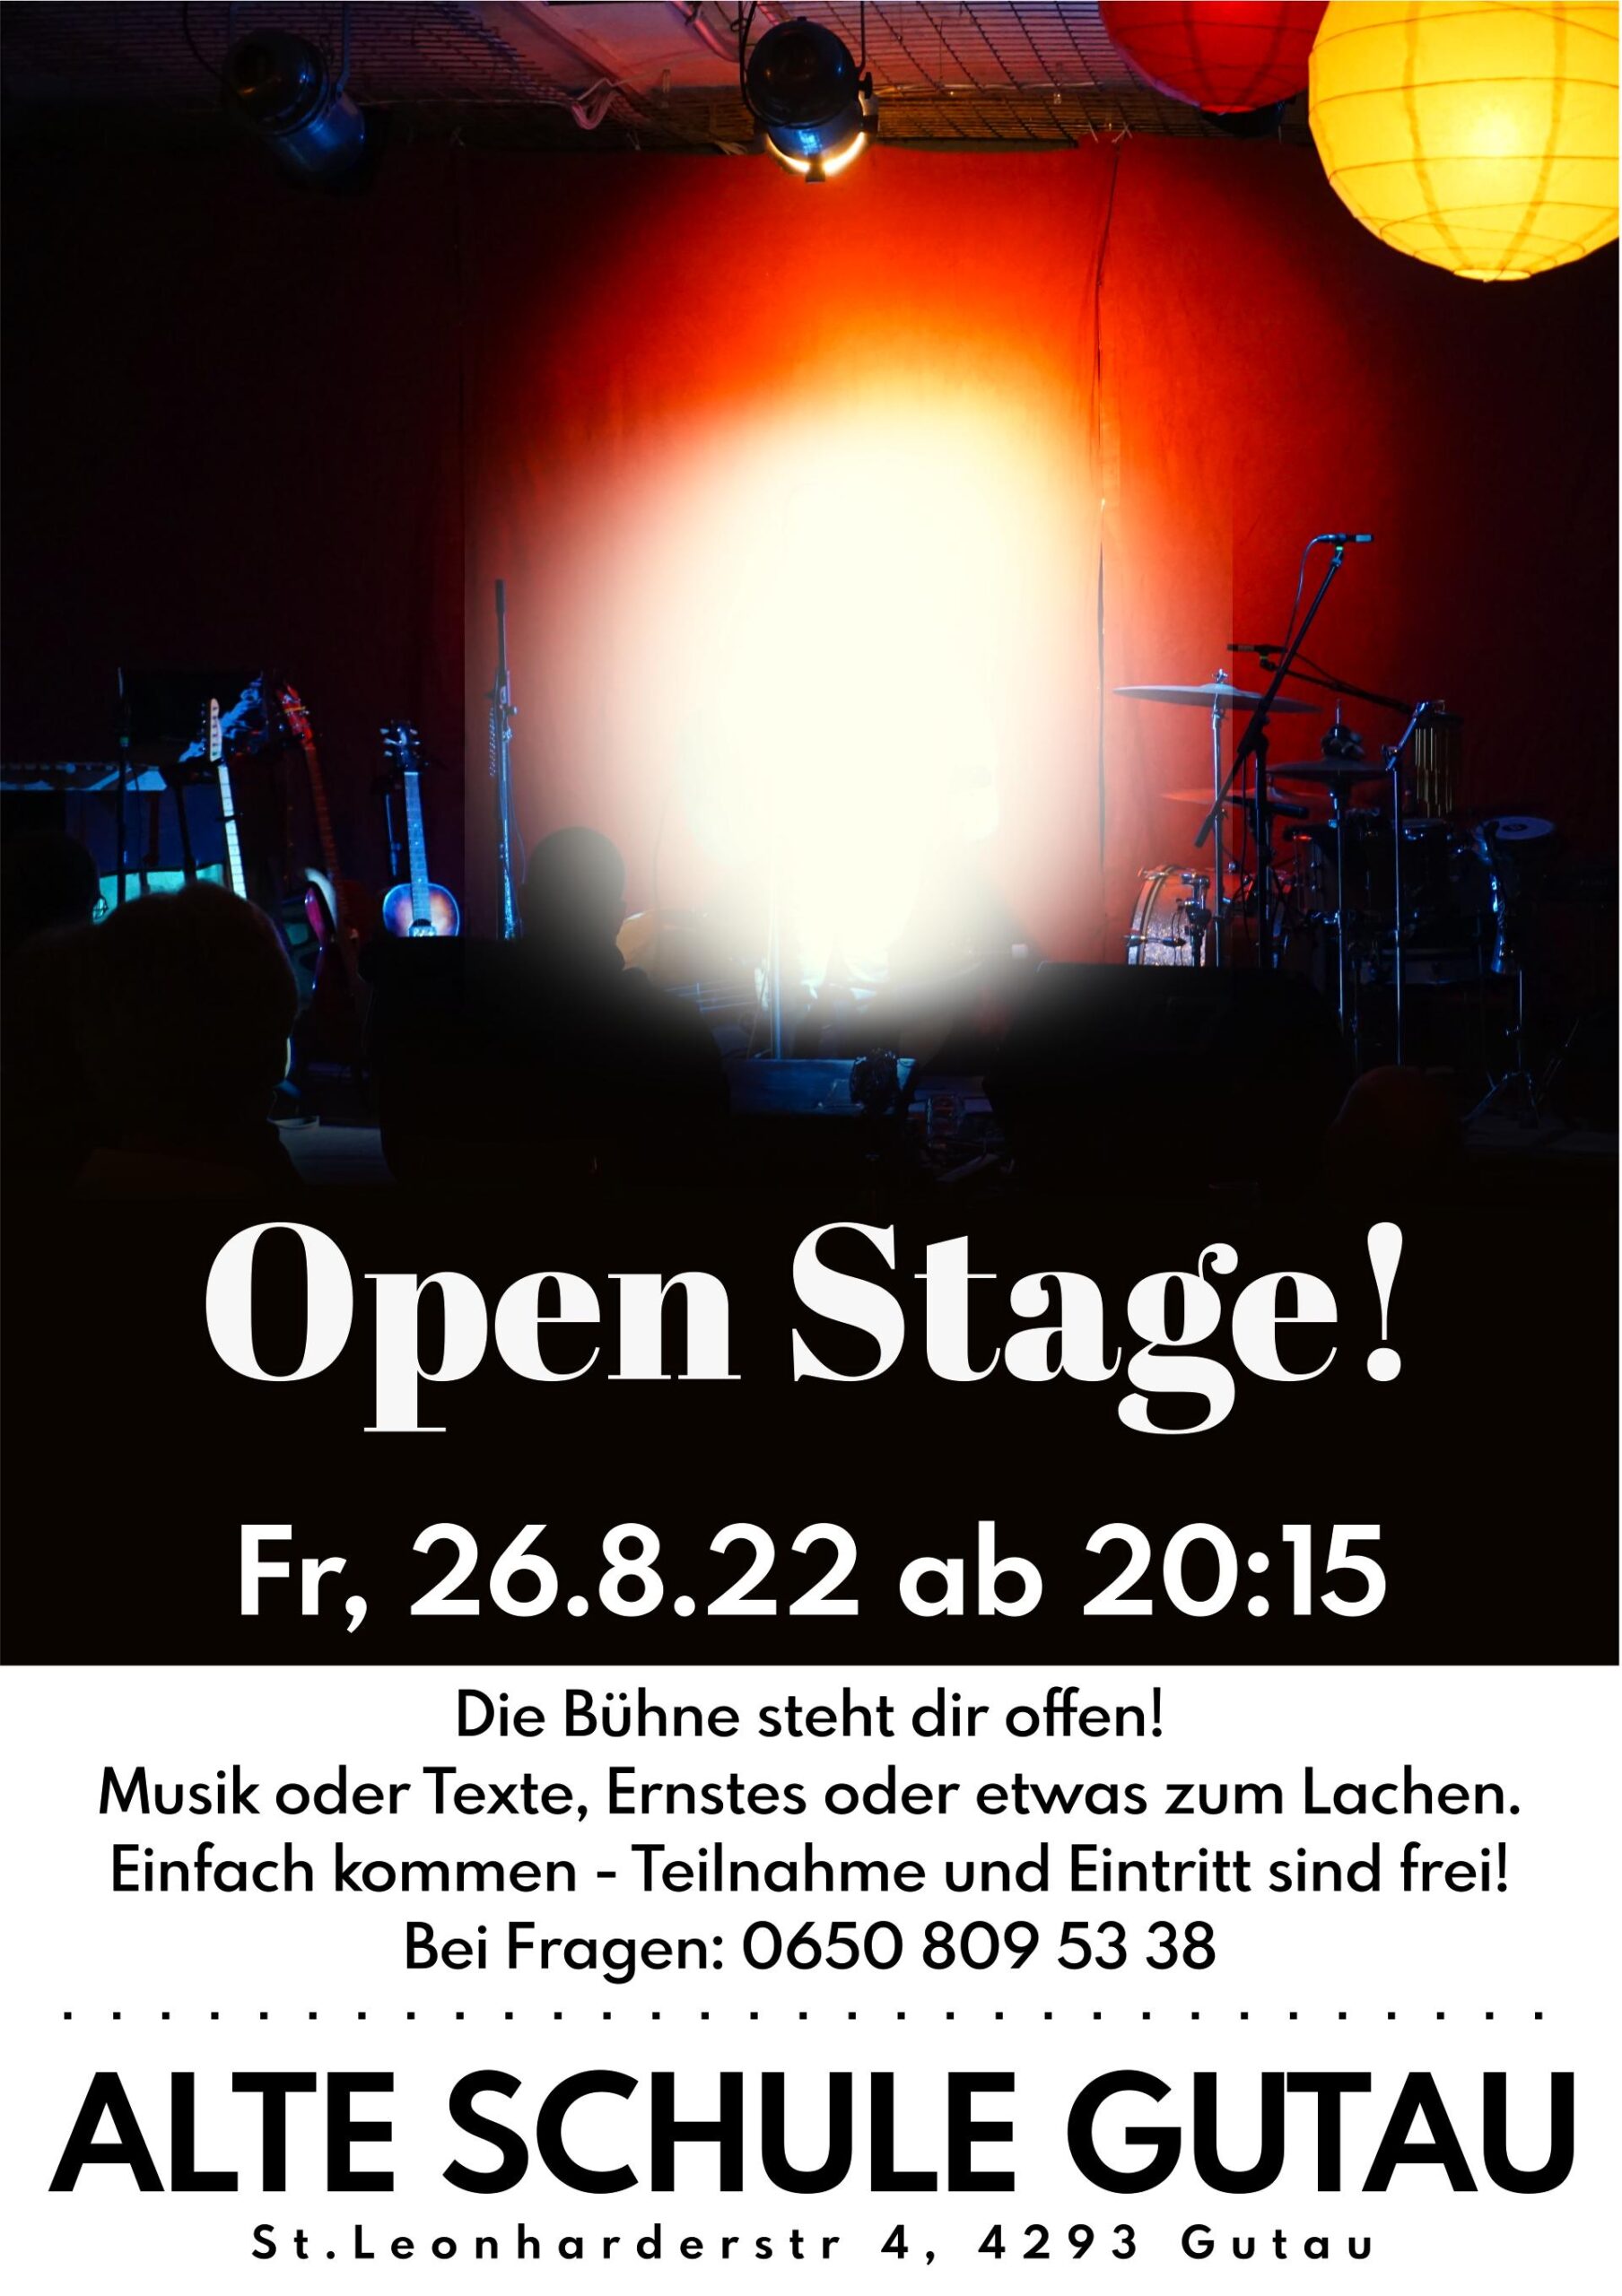 Open stage!